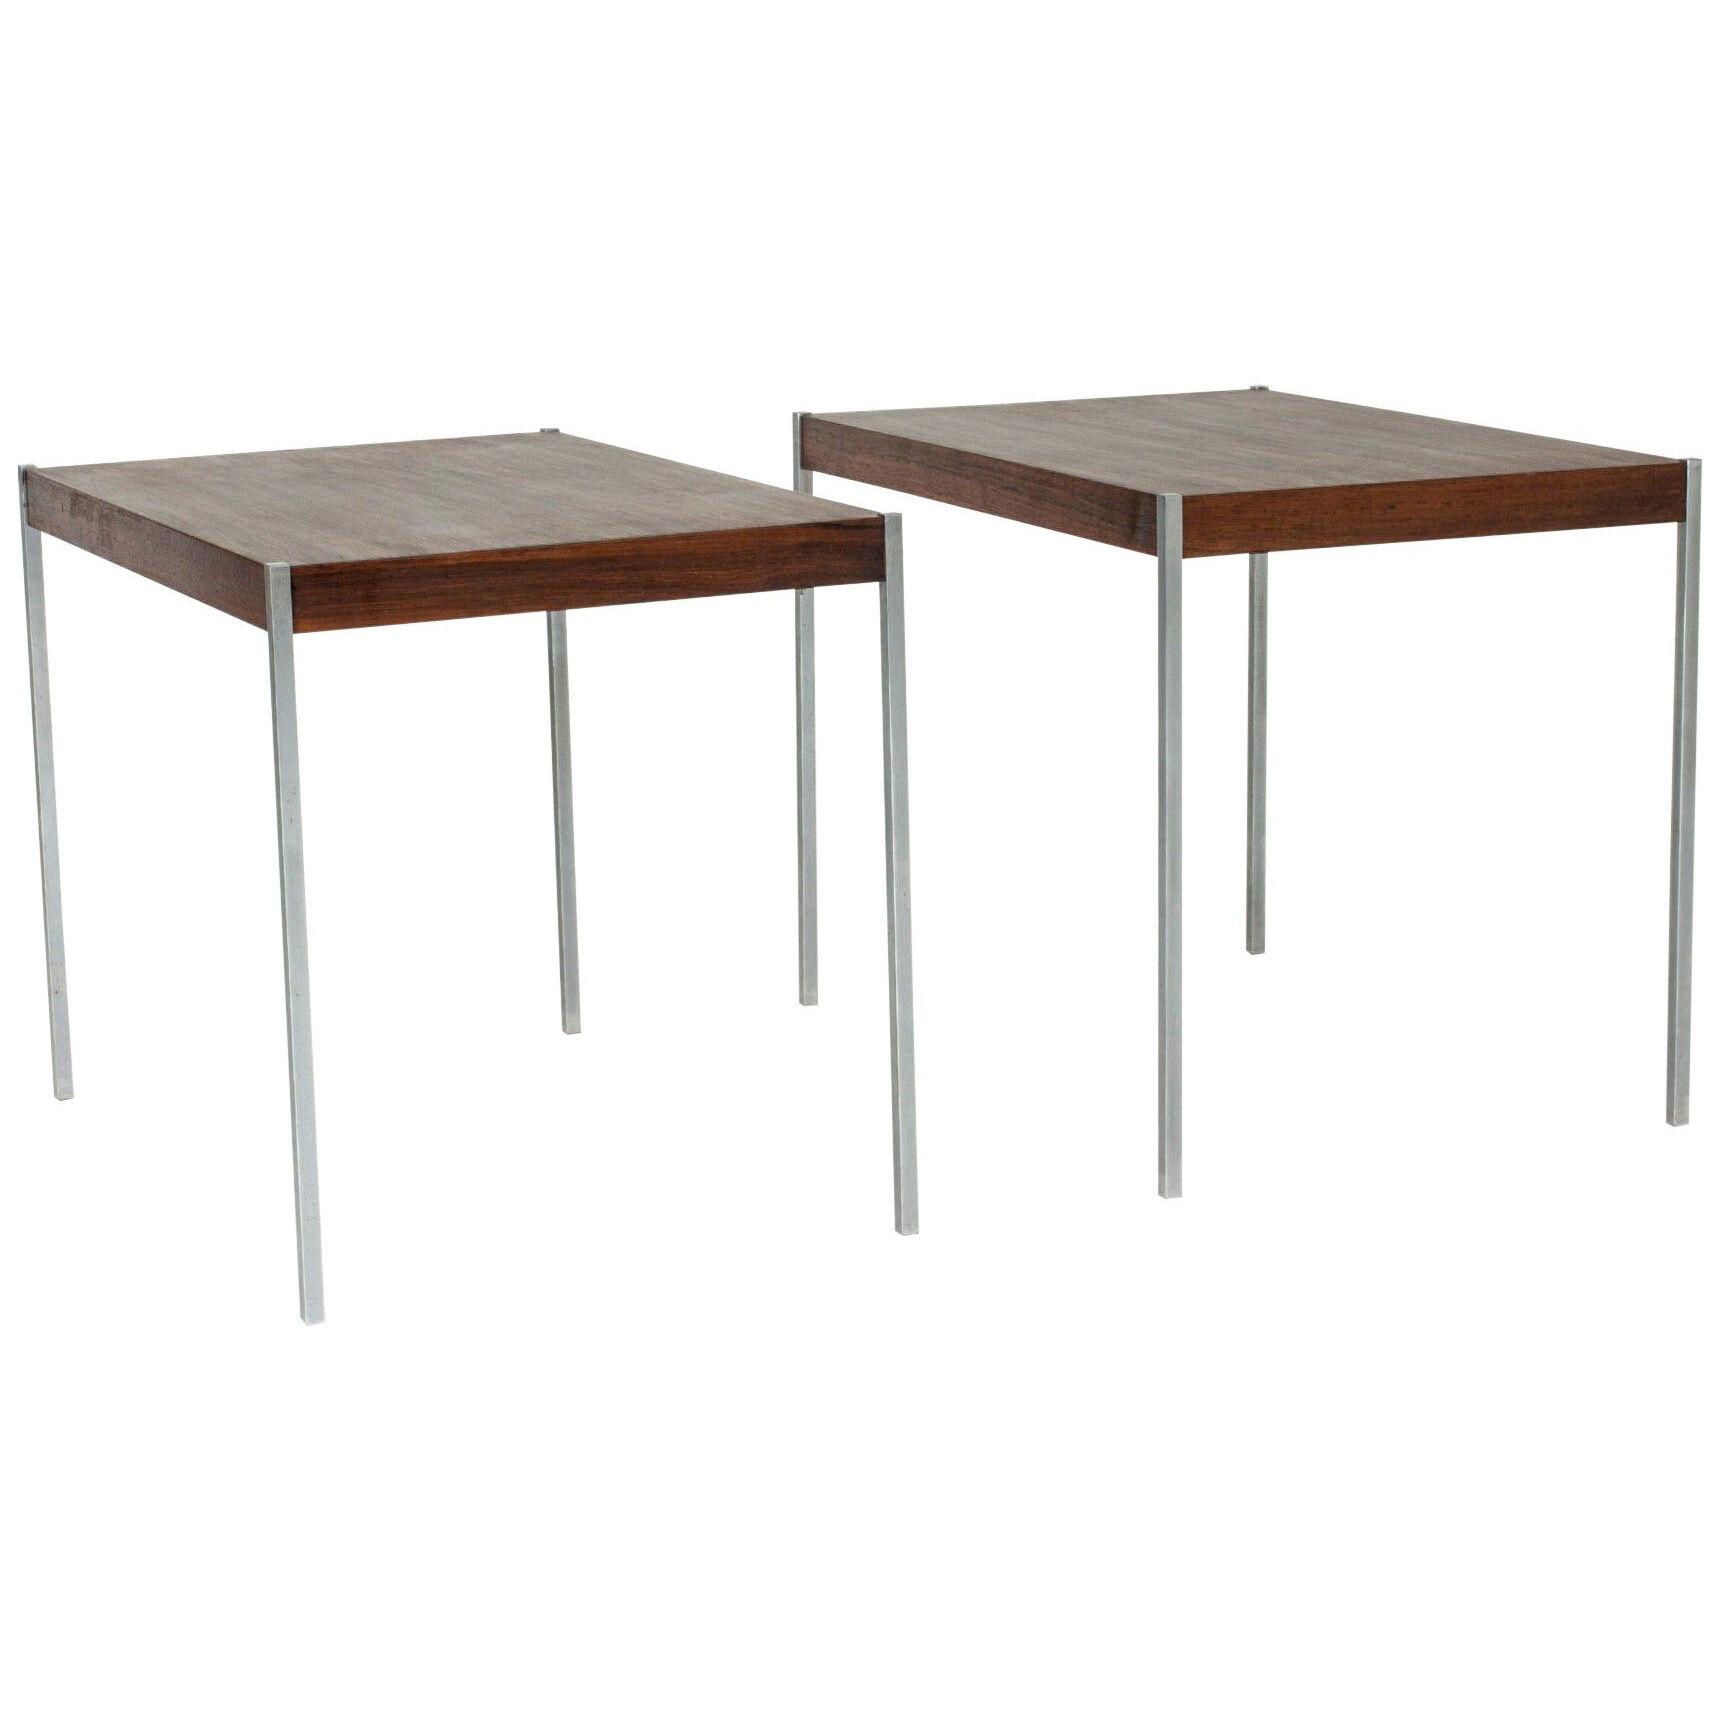 Pair of Cool Side Tables by Uno and östen Kristiansson